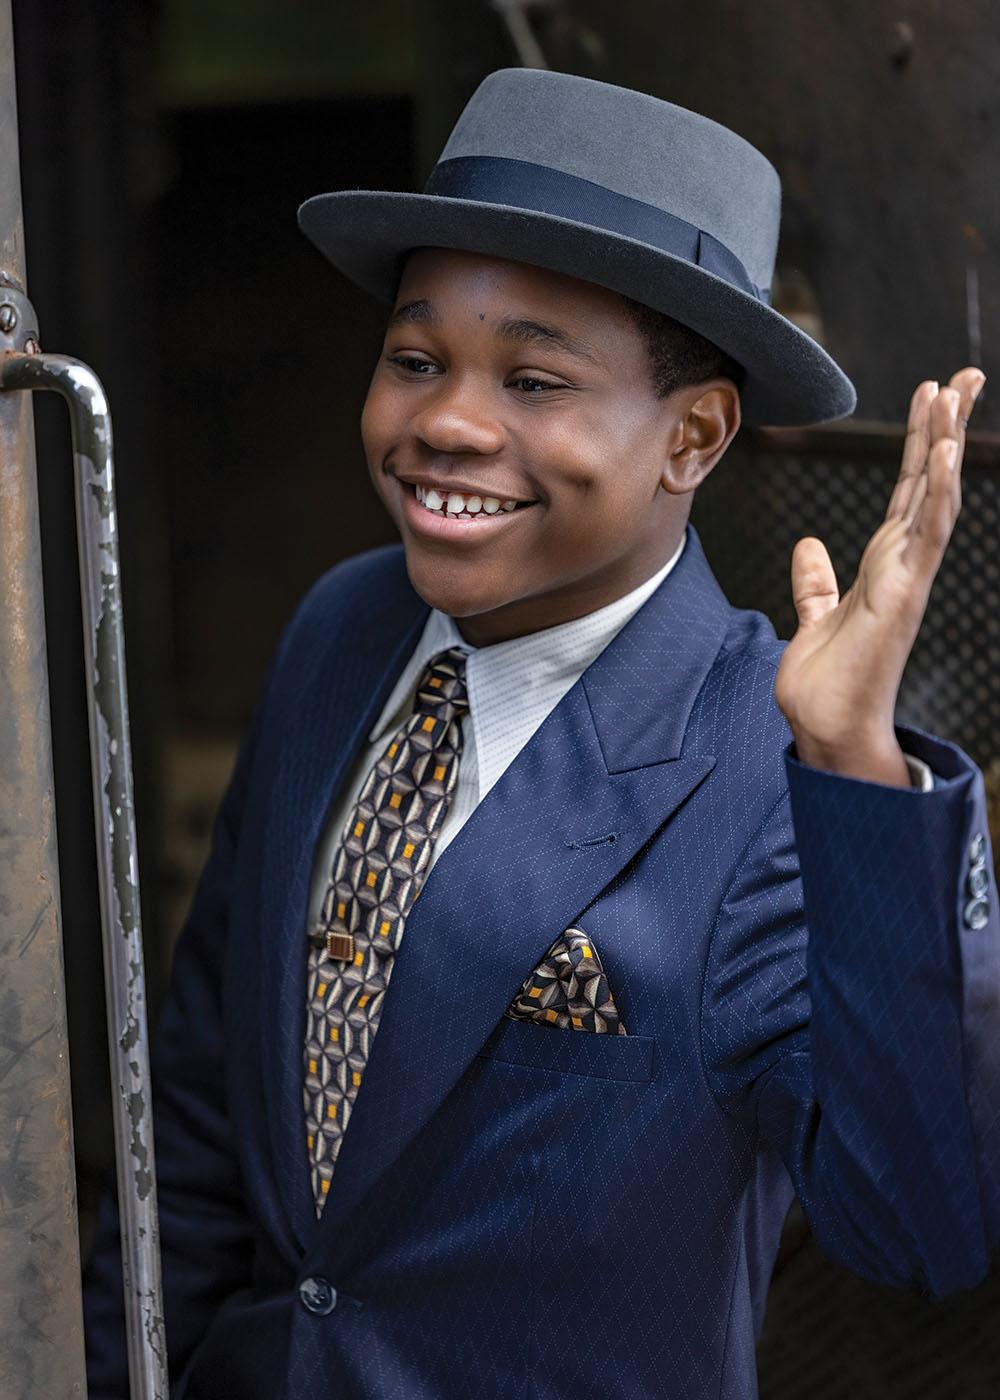 Jalyn Hall as Emmett Till, seen here as he boards a train in Chicago for his fatal visit to Mississippi. Says Hall, “I was really stepping into his shoes, literally and metaphorically. Looking into a mirror, while wearing his clothes, I felt like I was actually him.”